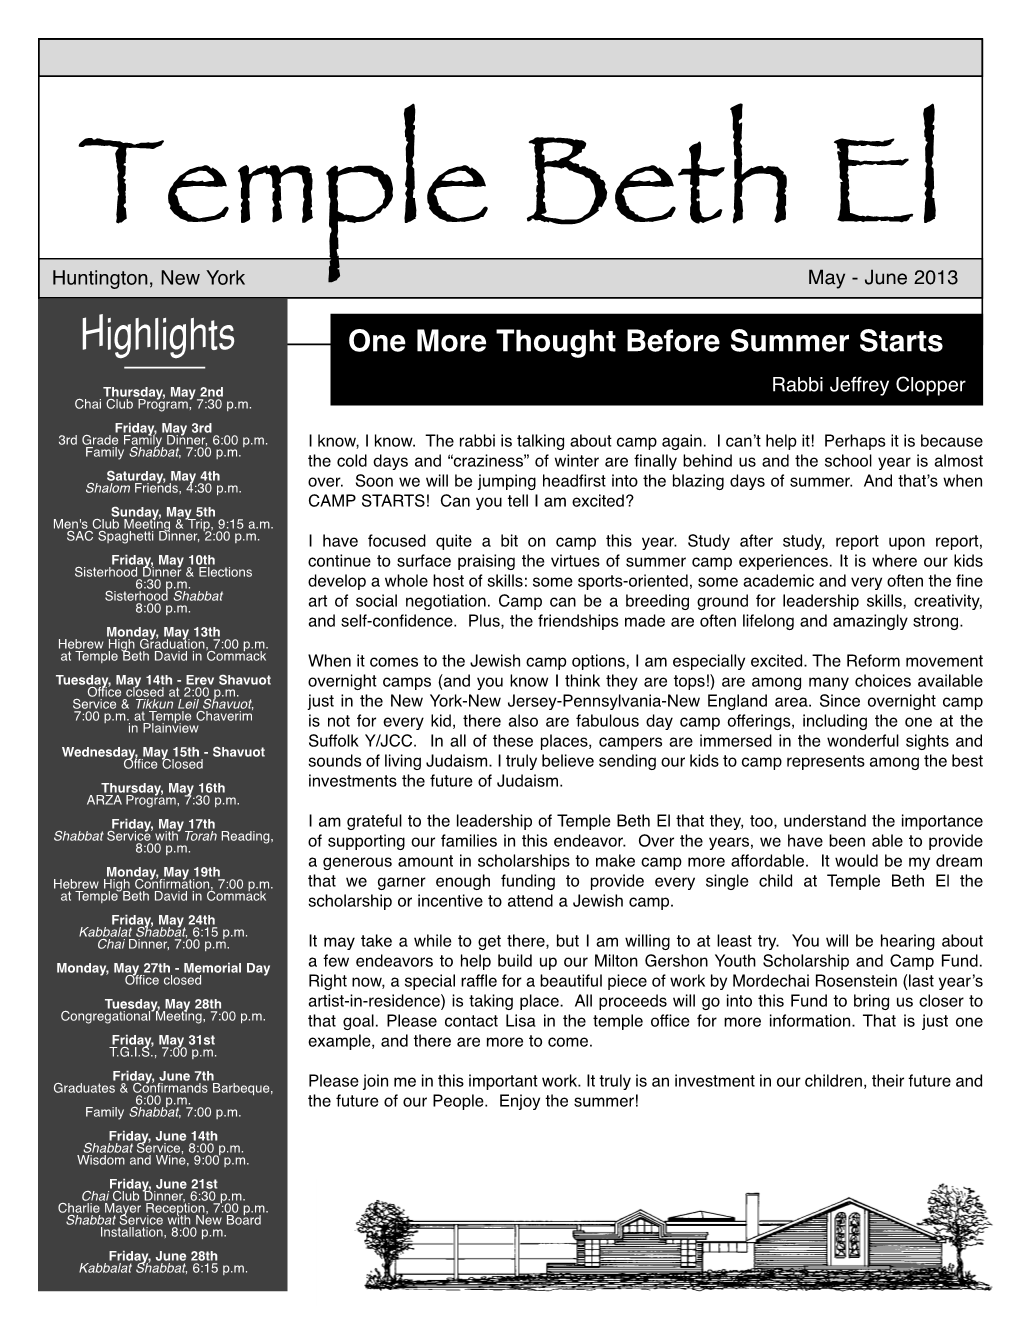 Highlights Beth El One More Thought Before Summer Starts